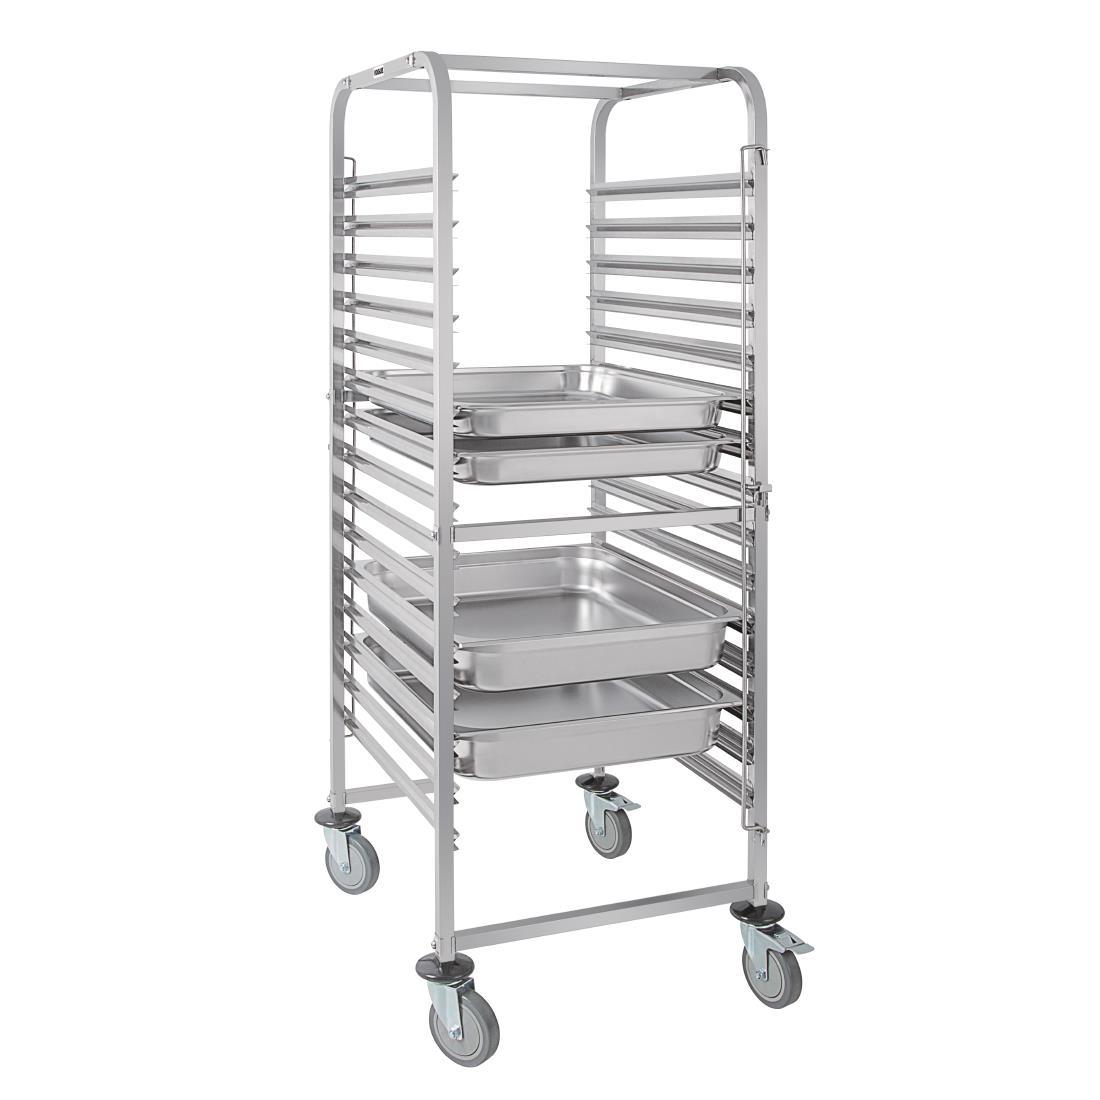 Vogue Gastronorm Racking Trolley 15 Level - GG499  - 2